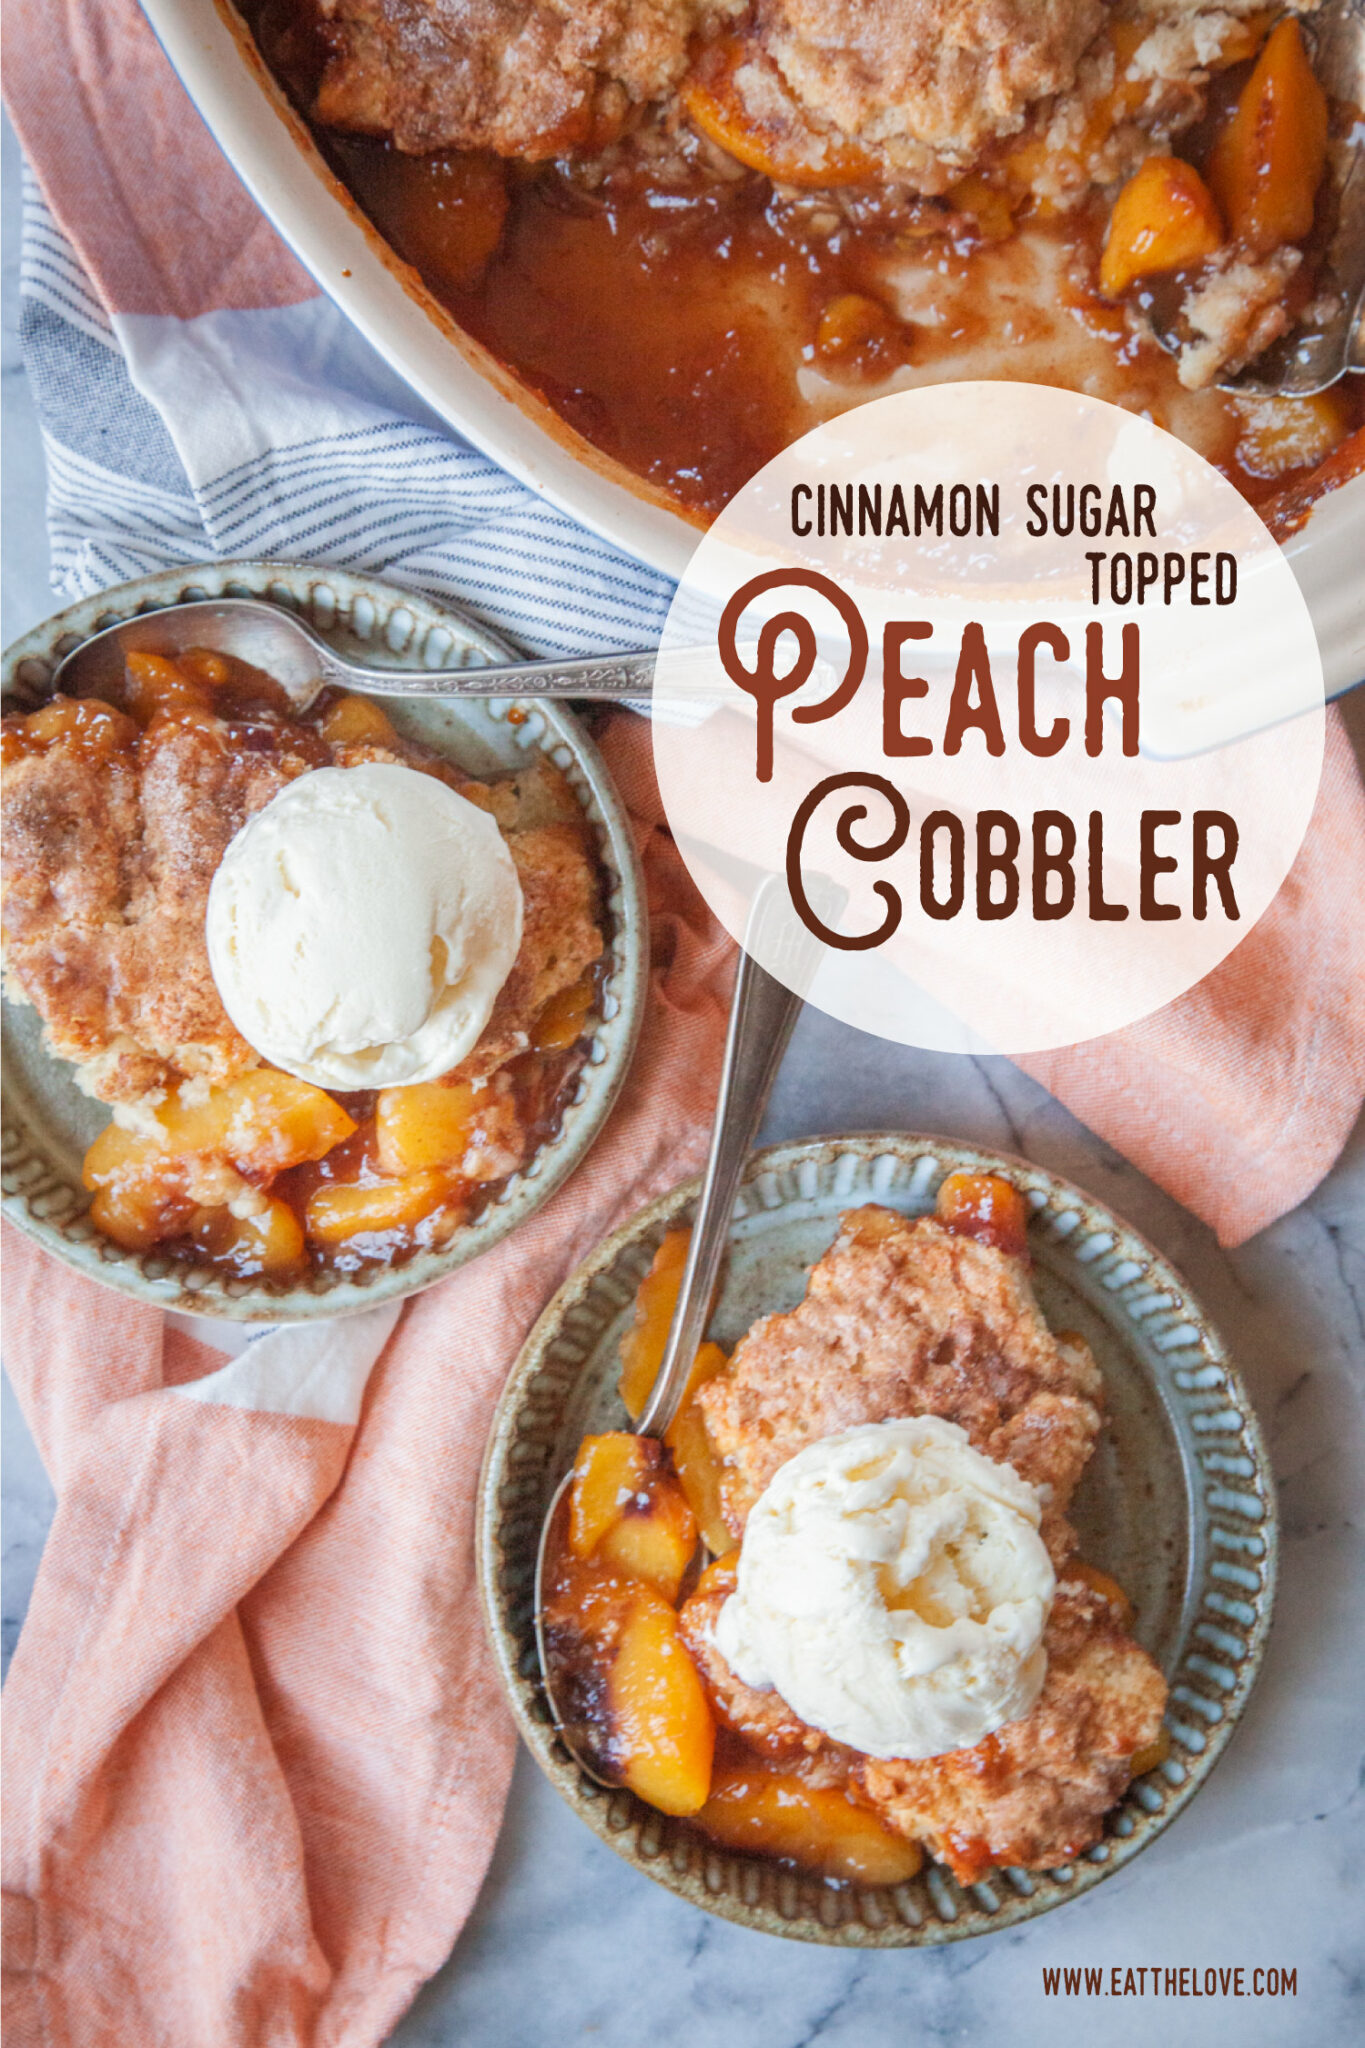 Two shallow bowls of peach cobbler with scoops of vanilla ice cream on top. The remaining cobbler is in a baking dish next to the bowls. The type on the image says cinnamon sugar topped peach cobbler. 